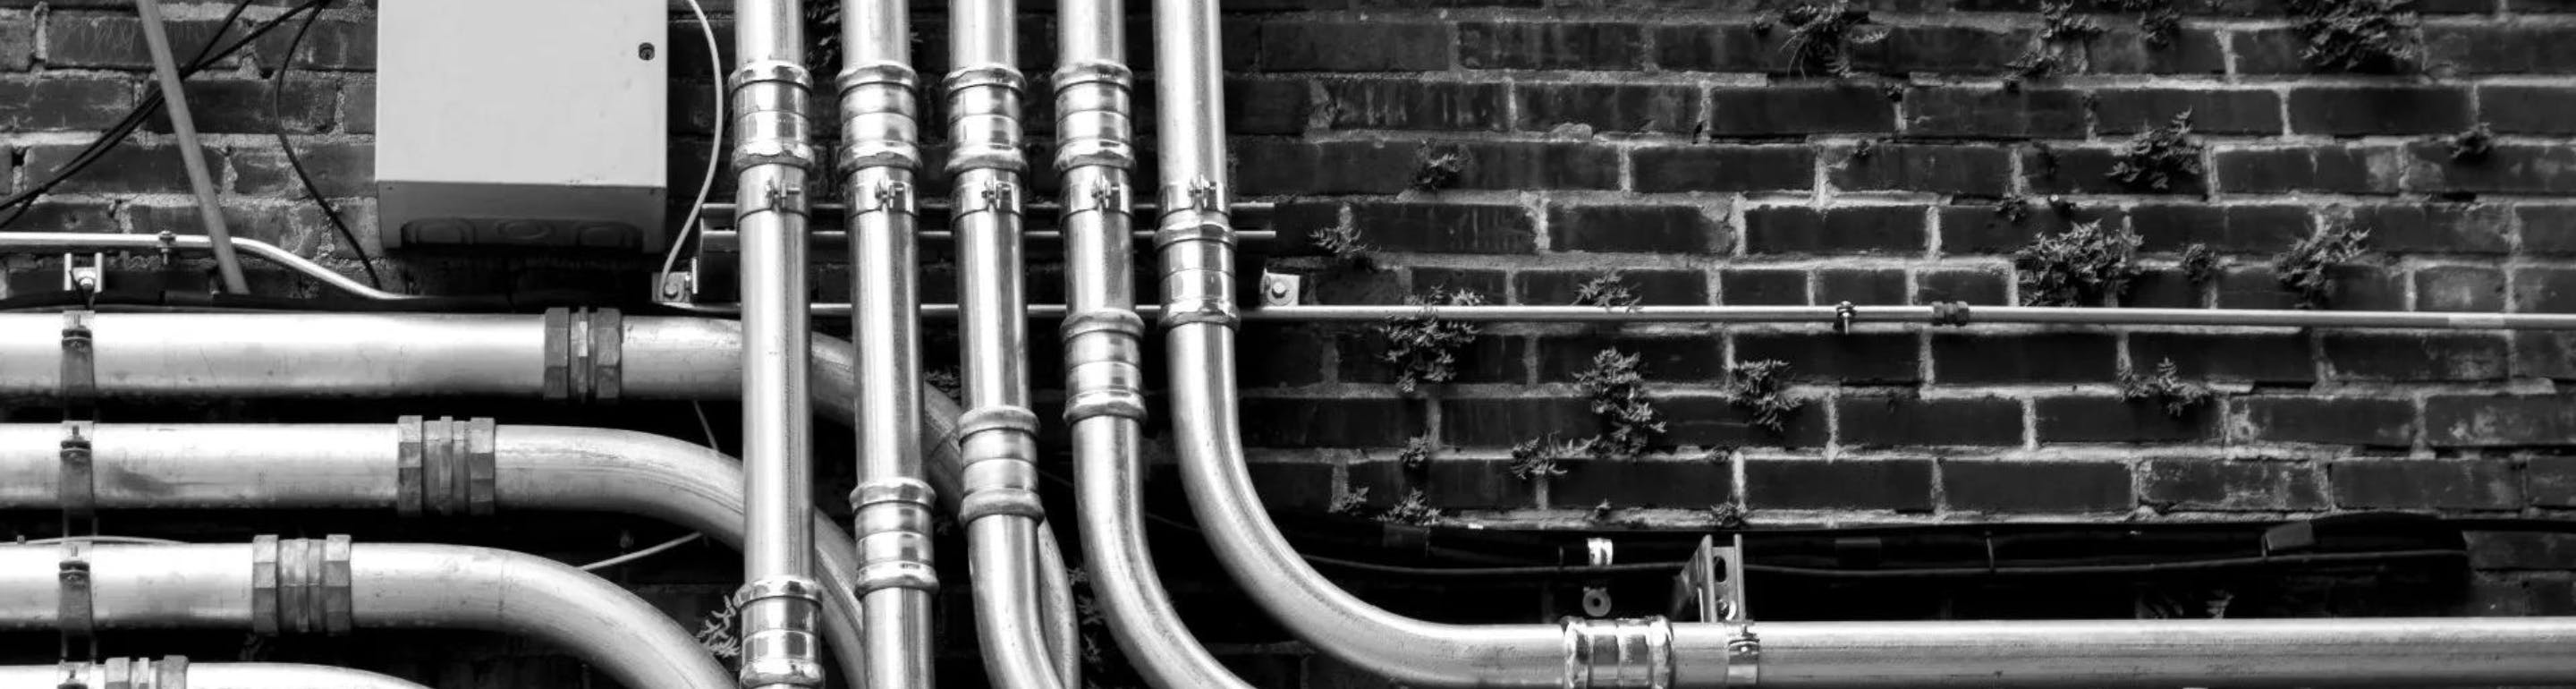 pipes against a brick wall